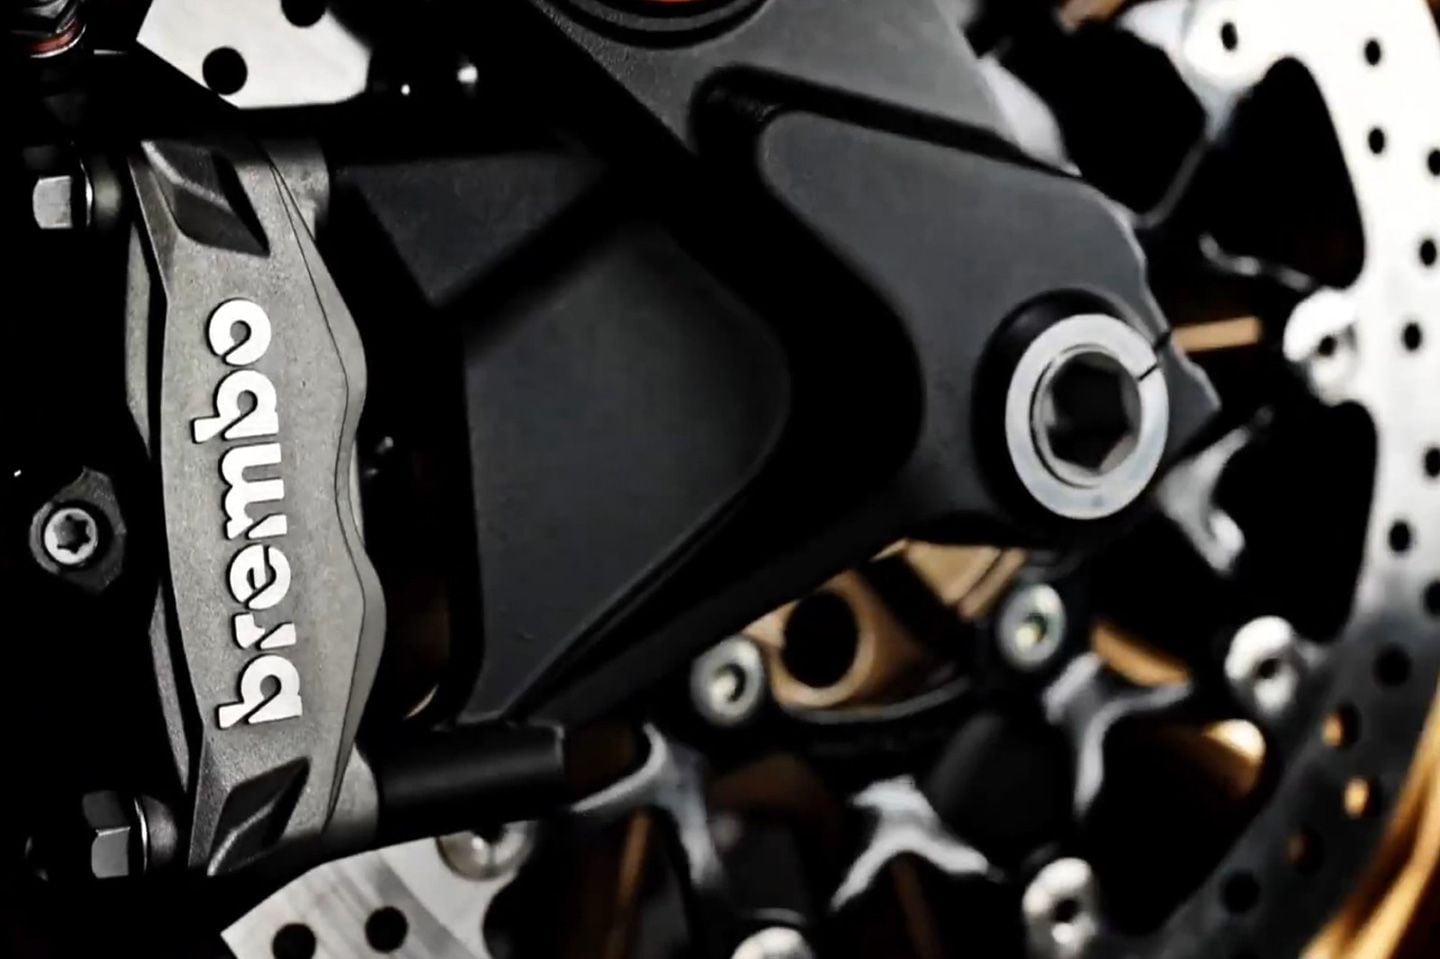 Brembo radial-mount, four-piston calipers are used up front.